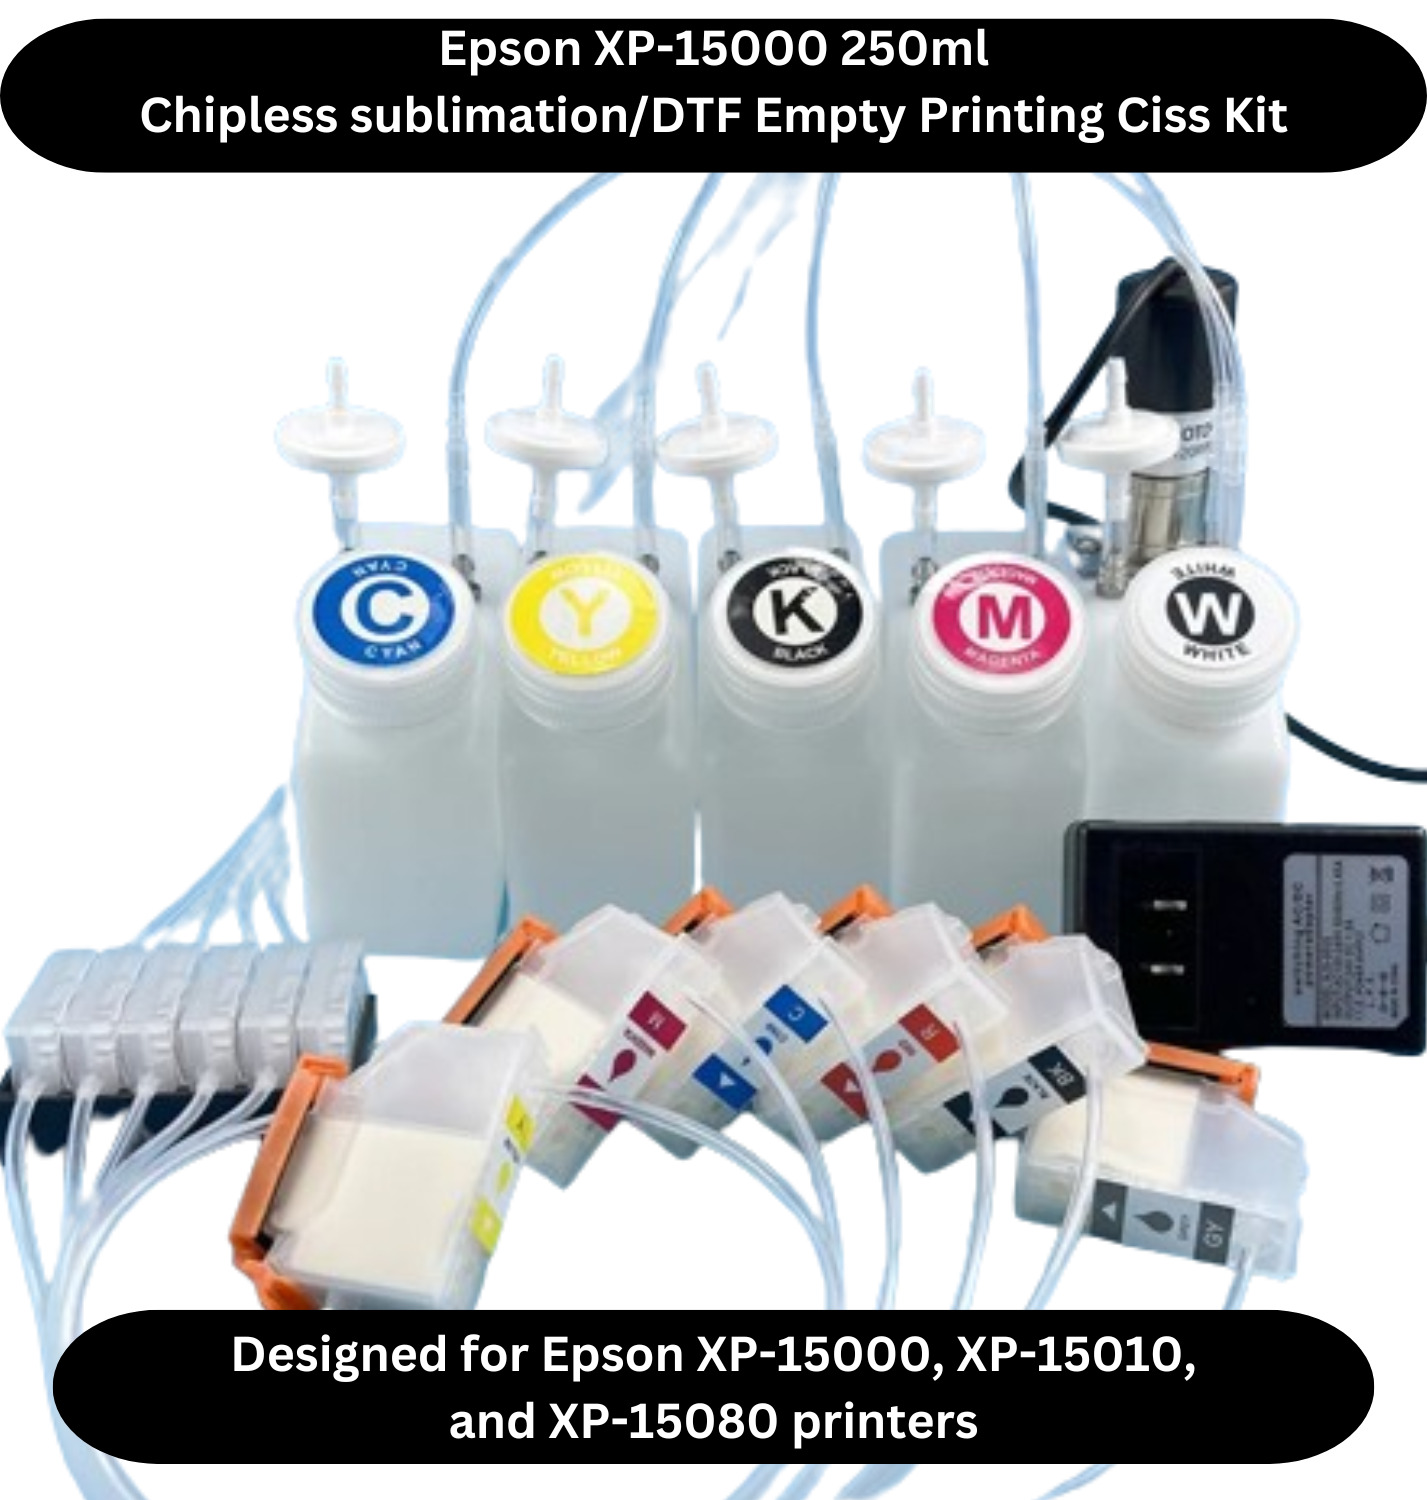 DTF CISS For Eps XP-15000 Continuous Ink Supply System With Stirrer and Damper